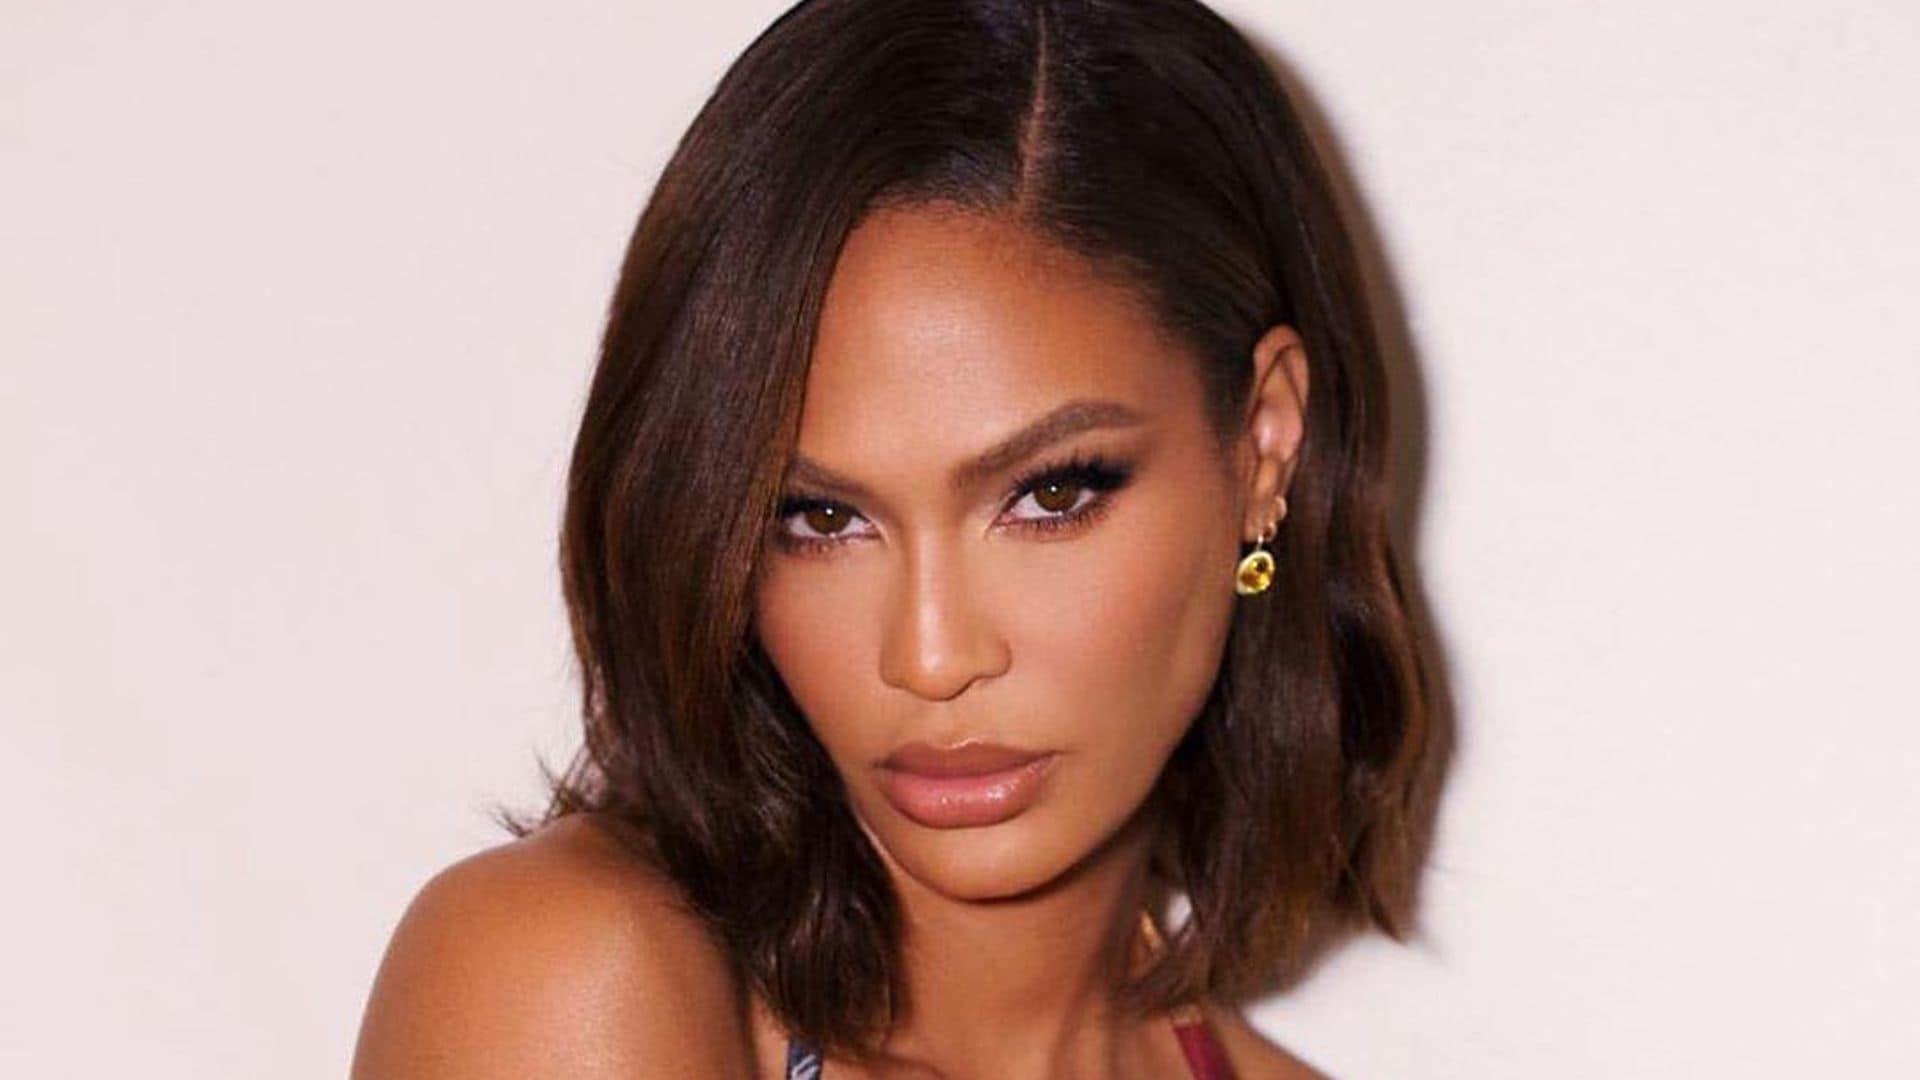 Joan Smalls gets candid about the thing that ‘pigeonholed’ her early in her career